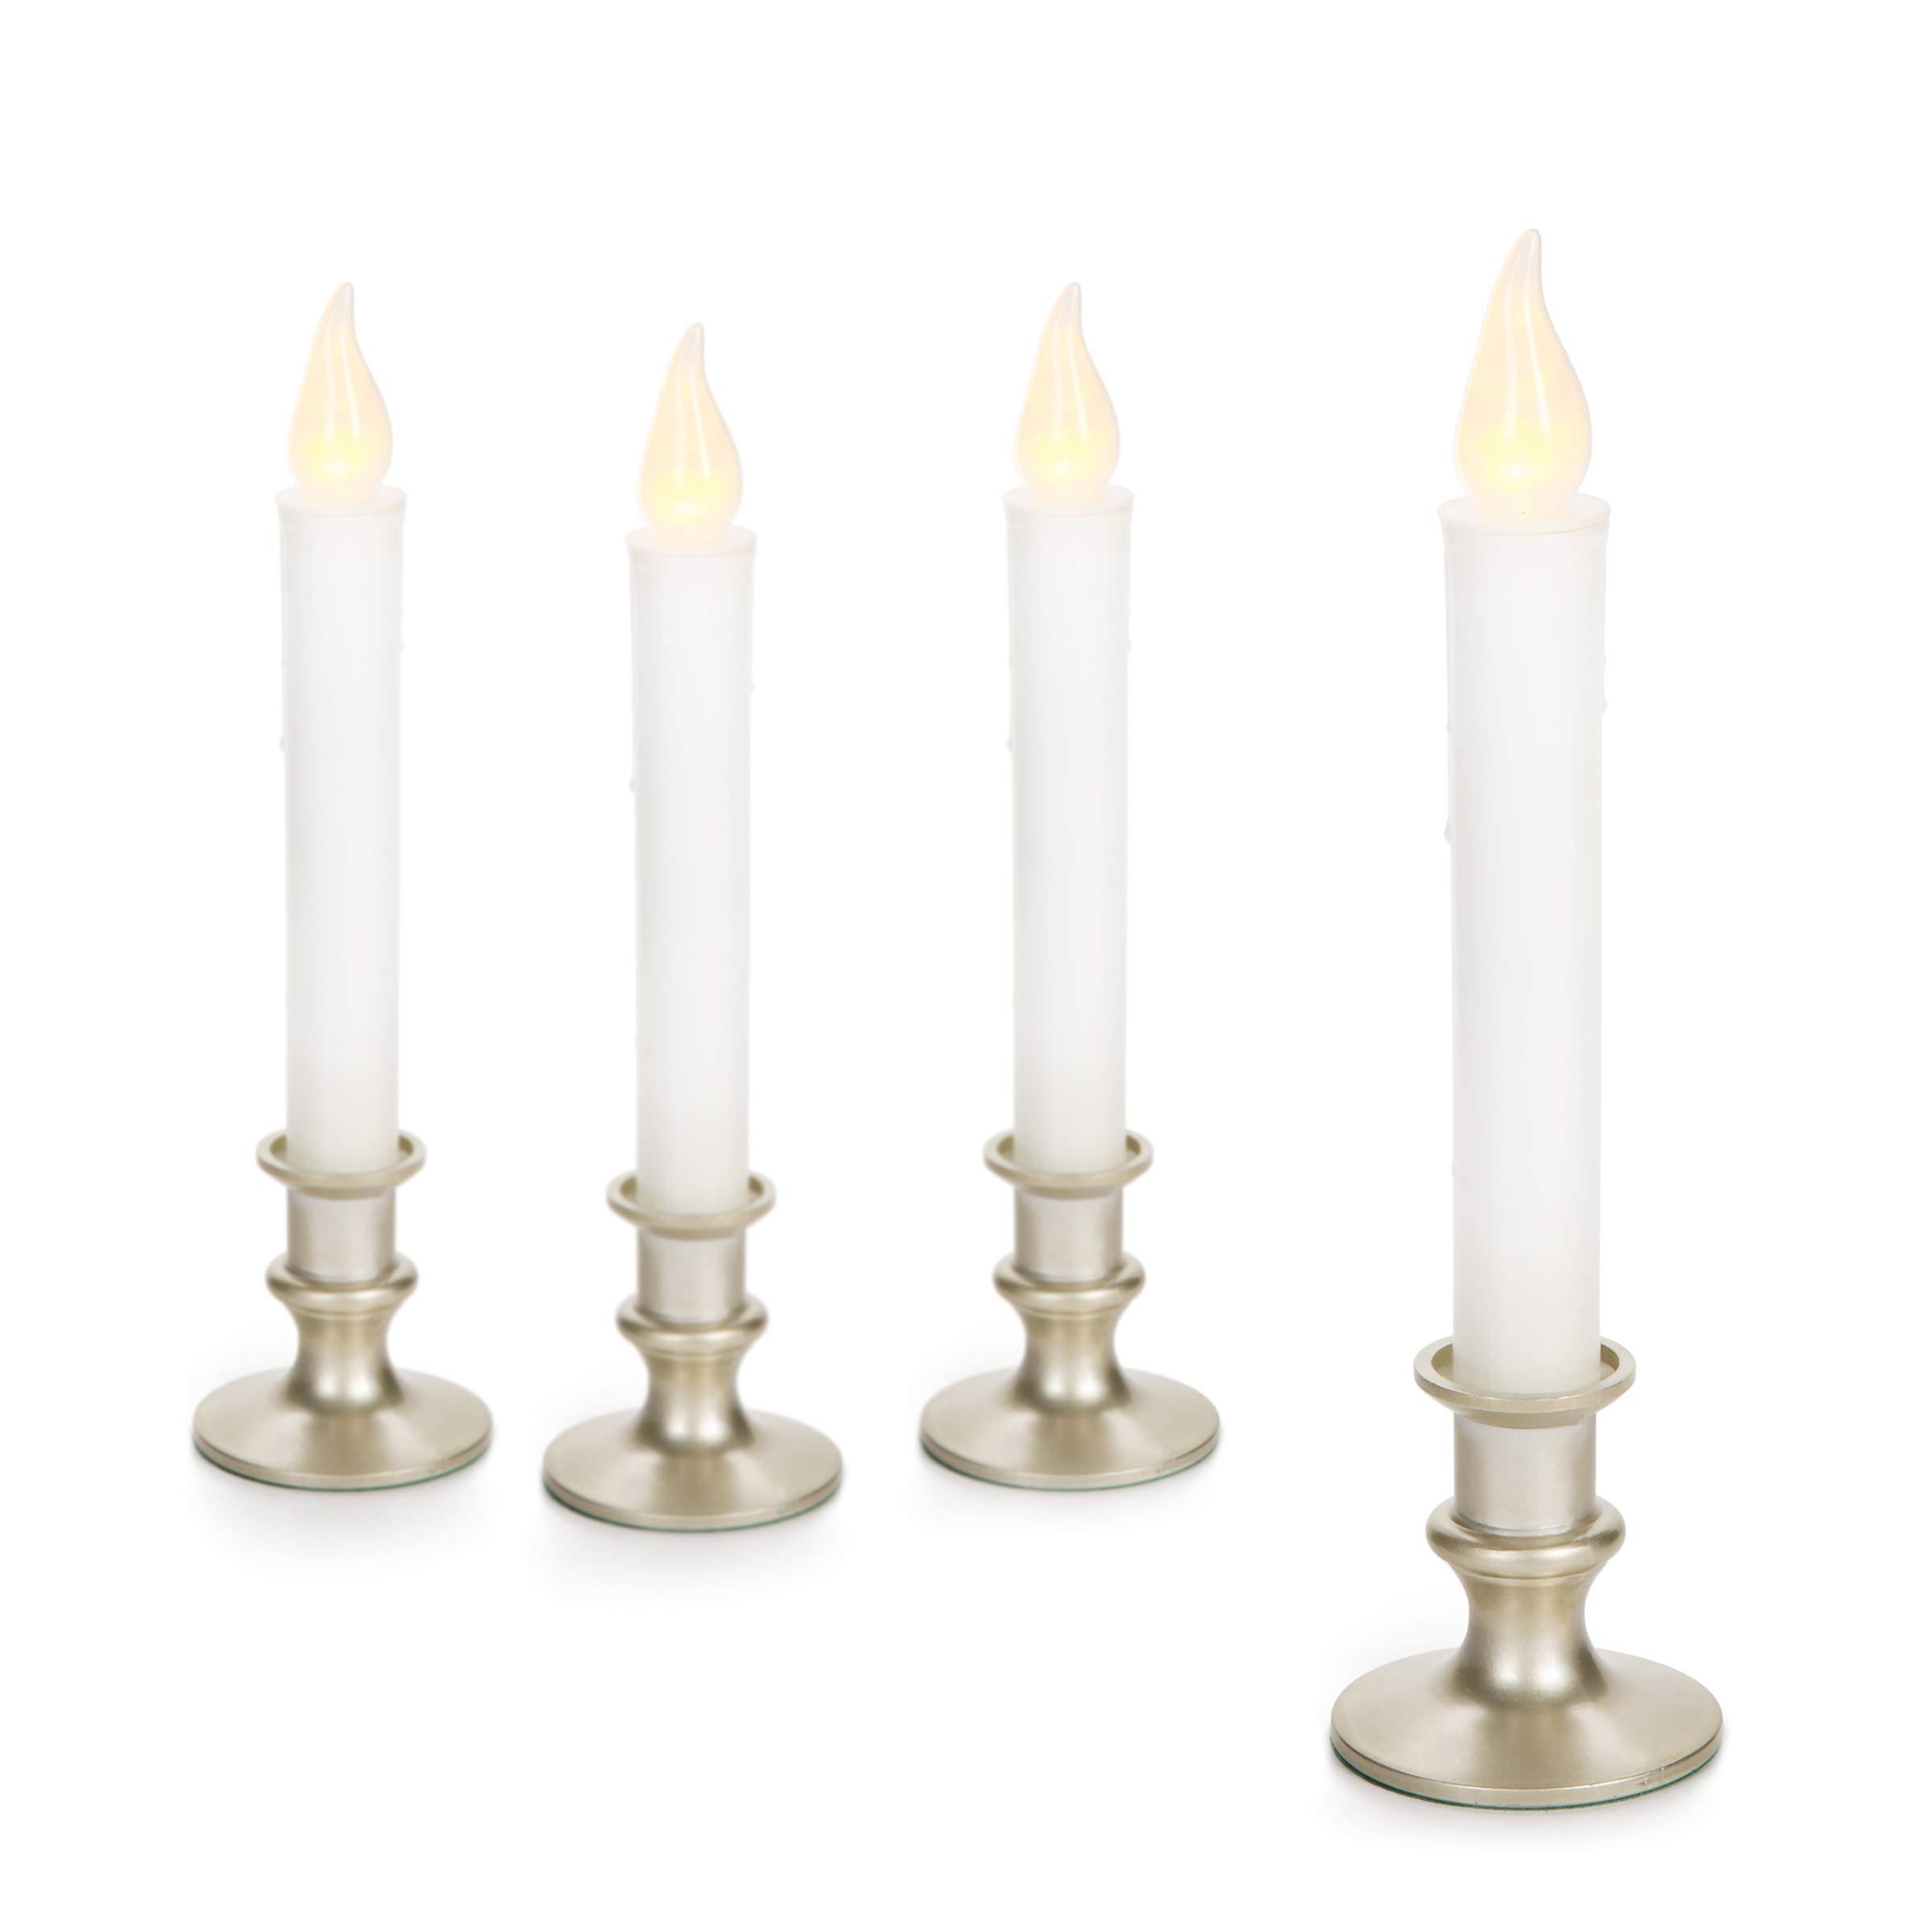 Darice 6205-54 Battery-Operated LED Pewter Base Candlesticks Candle Lamps with Remote - 5 Pieces